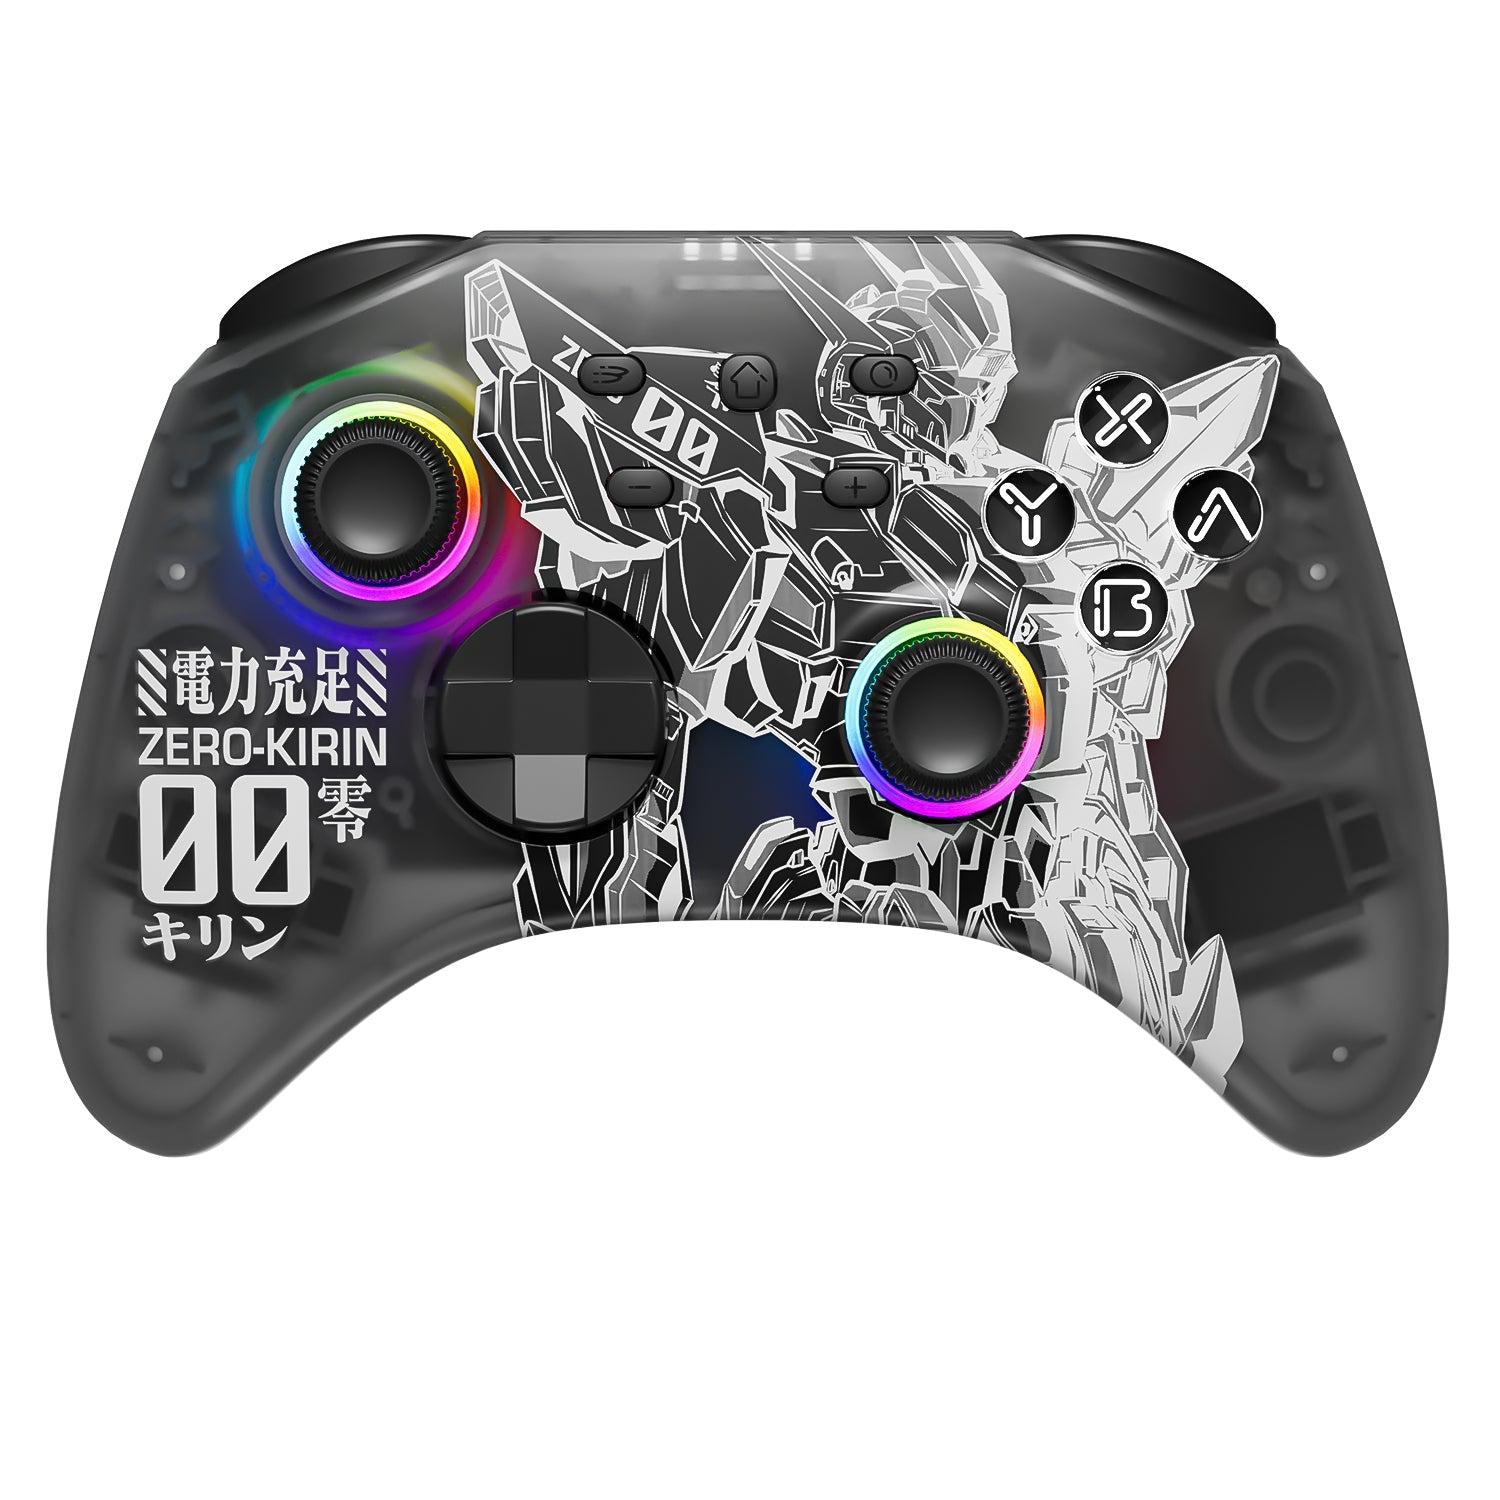 Mytrix Zero-Kirin Wireless Pro RGB Controller with Programmable Back Buttons and Turbo, for Nintendo Switch, PC, Android & iOS